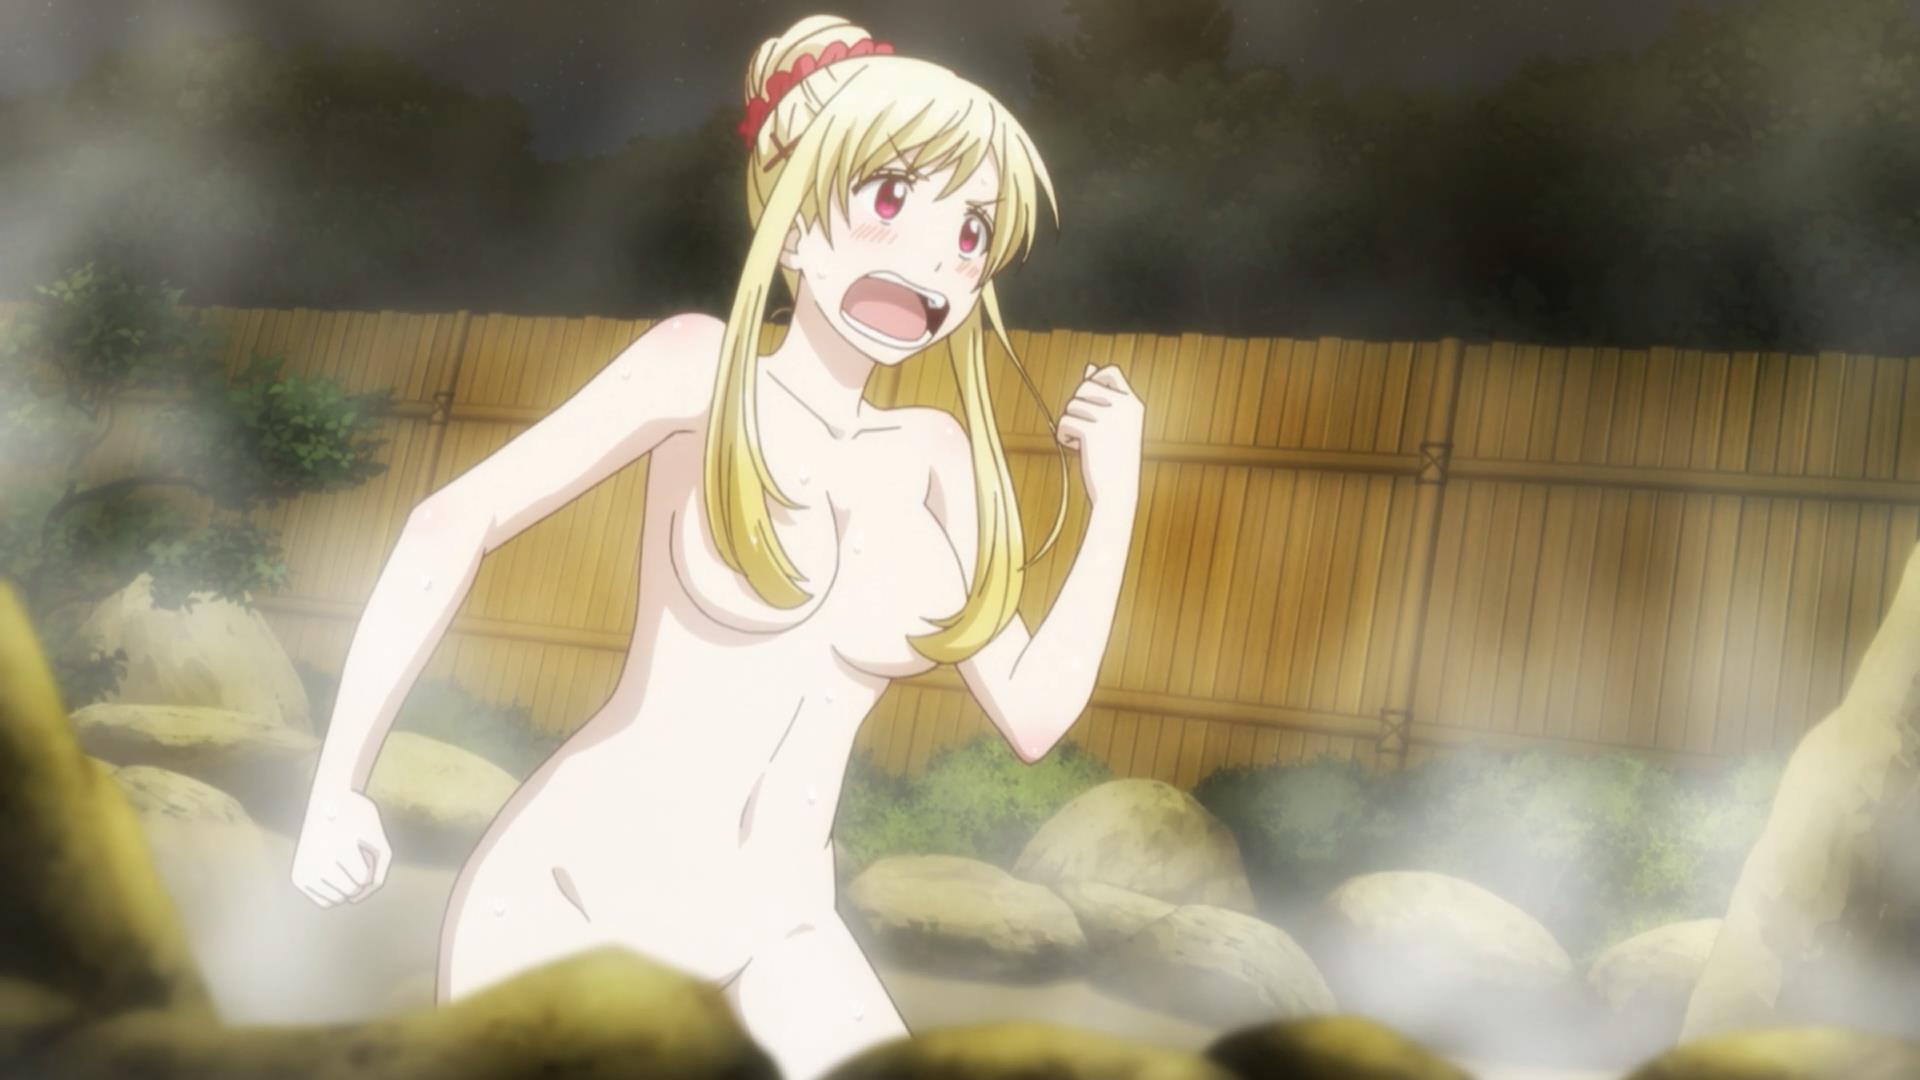 [HorribleSubs] Yamada-kun and the Seven Witches - 06 [1080p].mkv_snapshot_10.24_[2015.05.17_13.46.46]